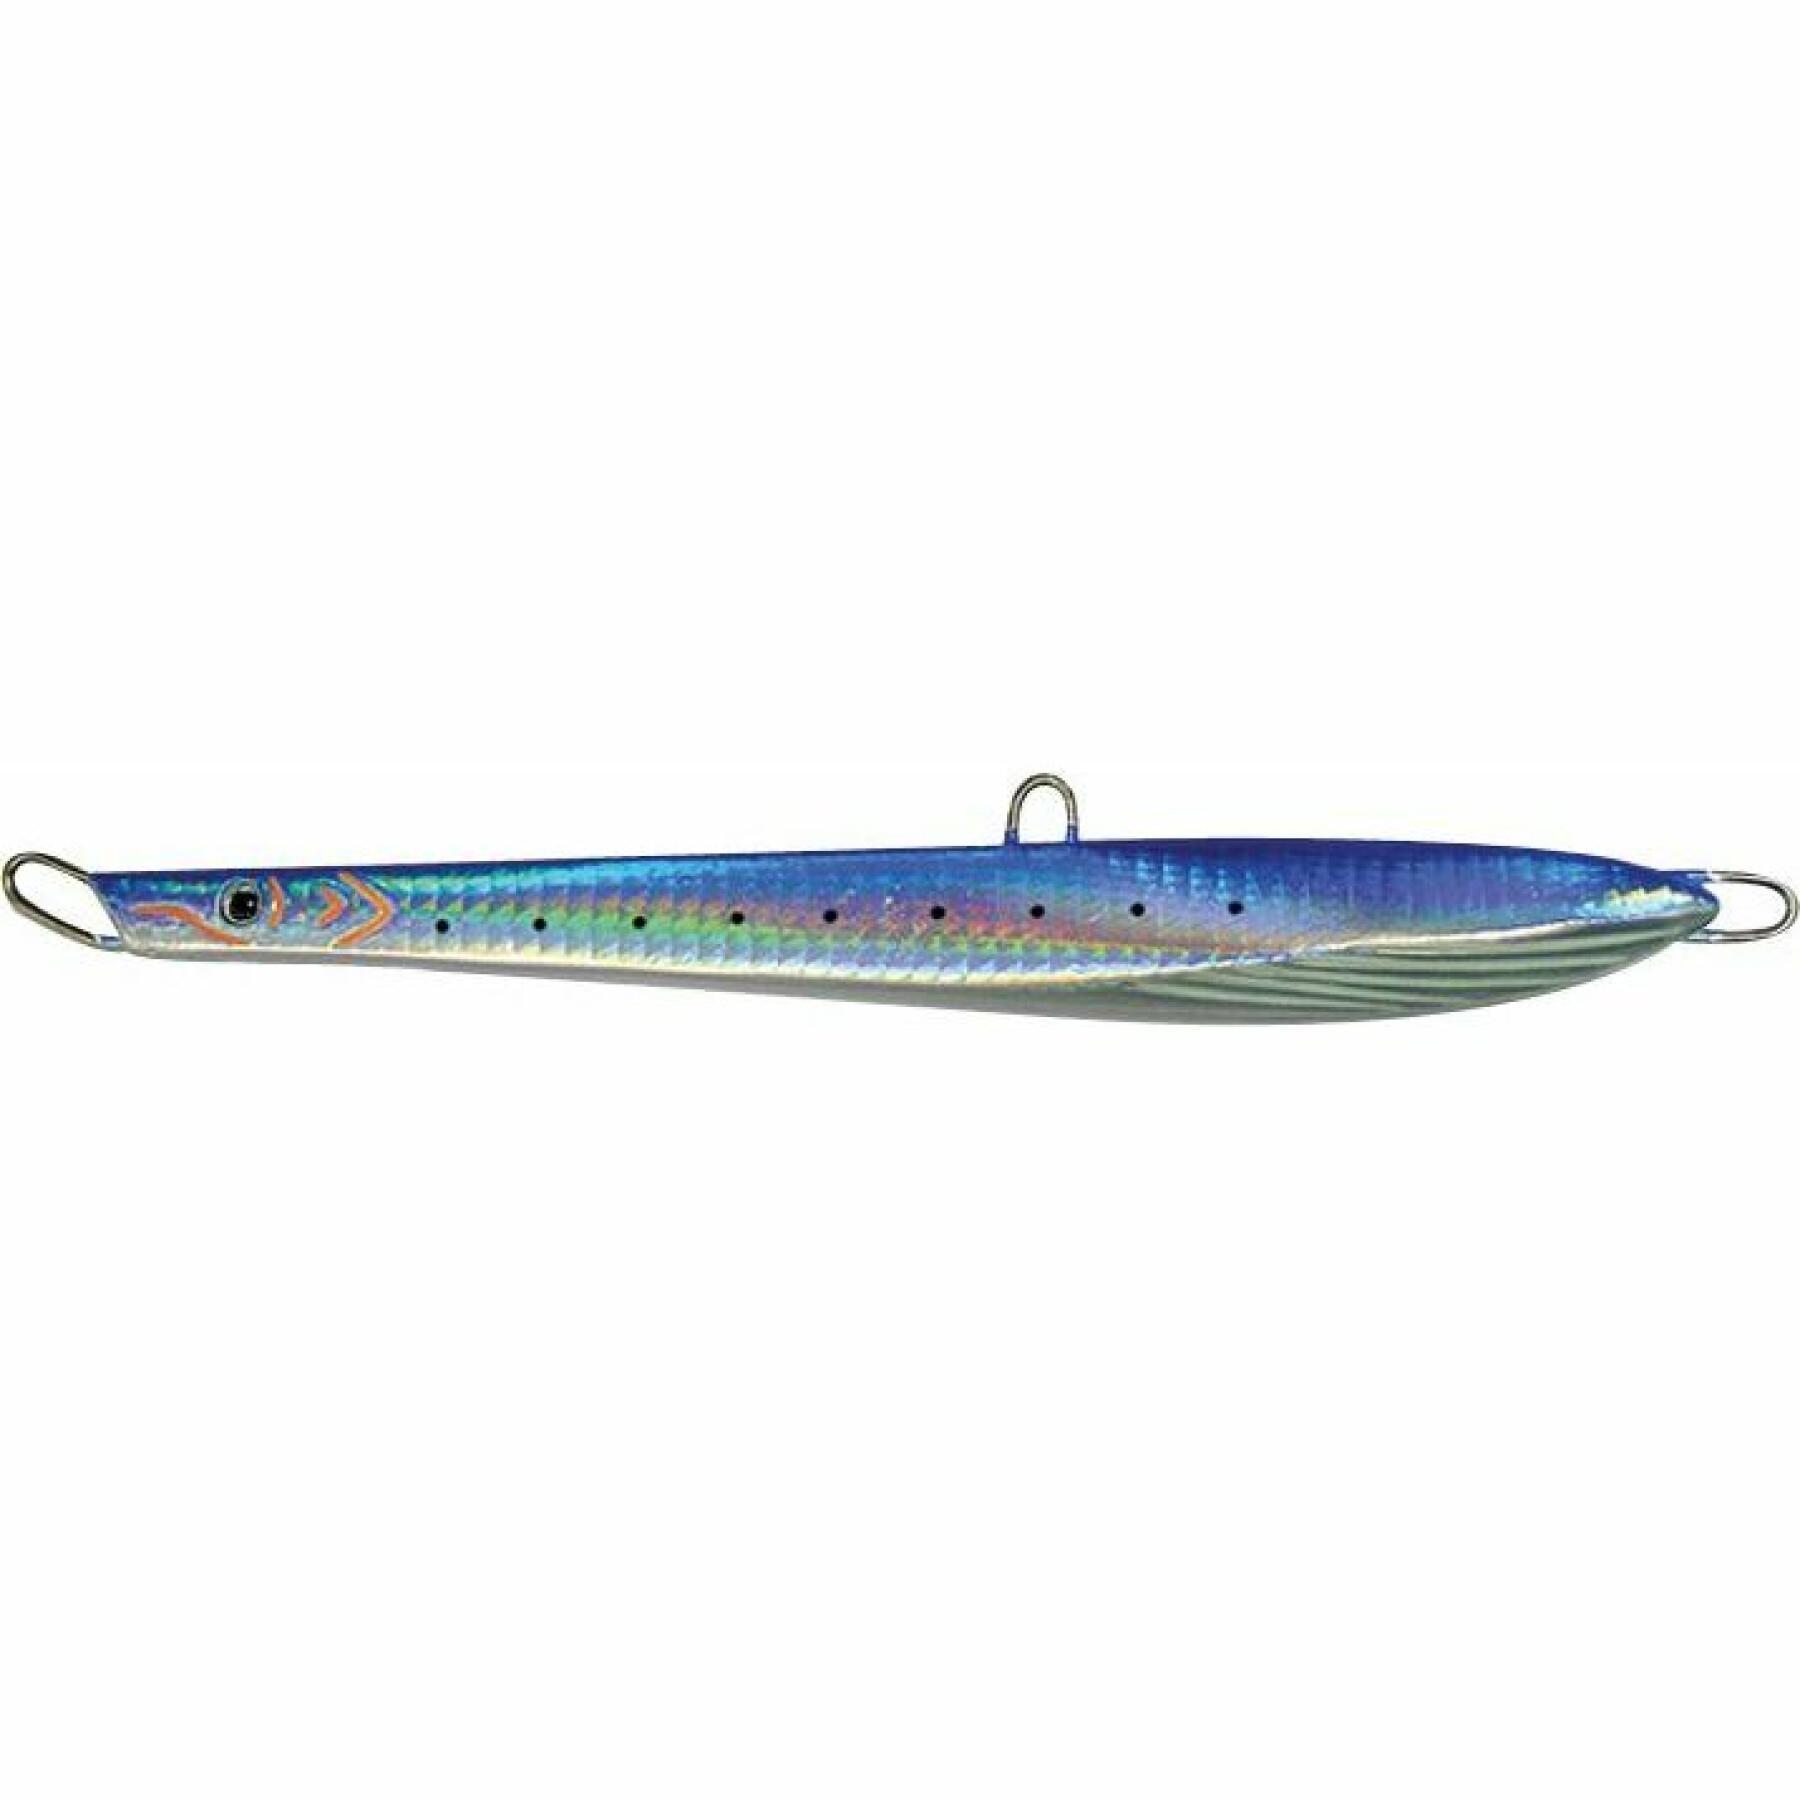 Lure Williamson abyss speed jig 21 cm